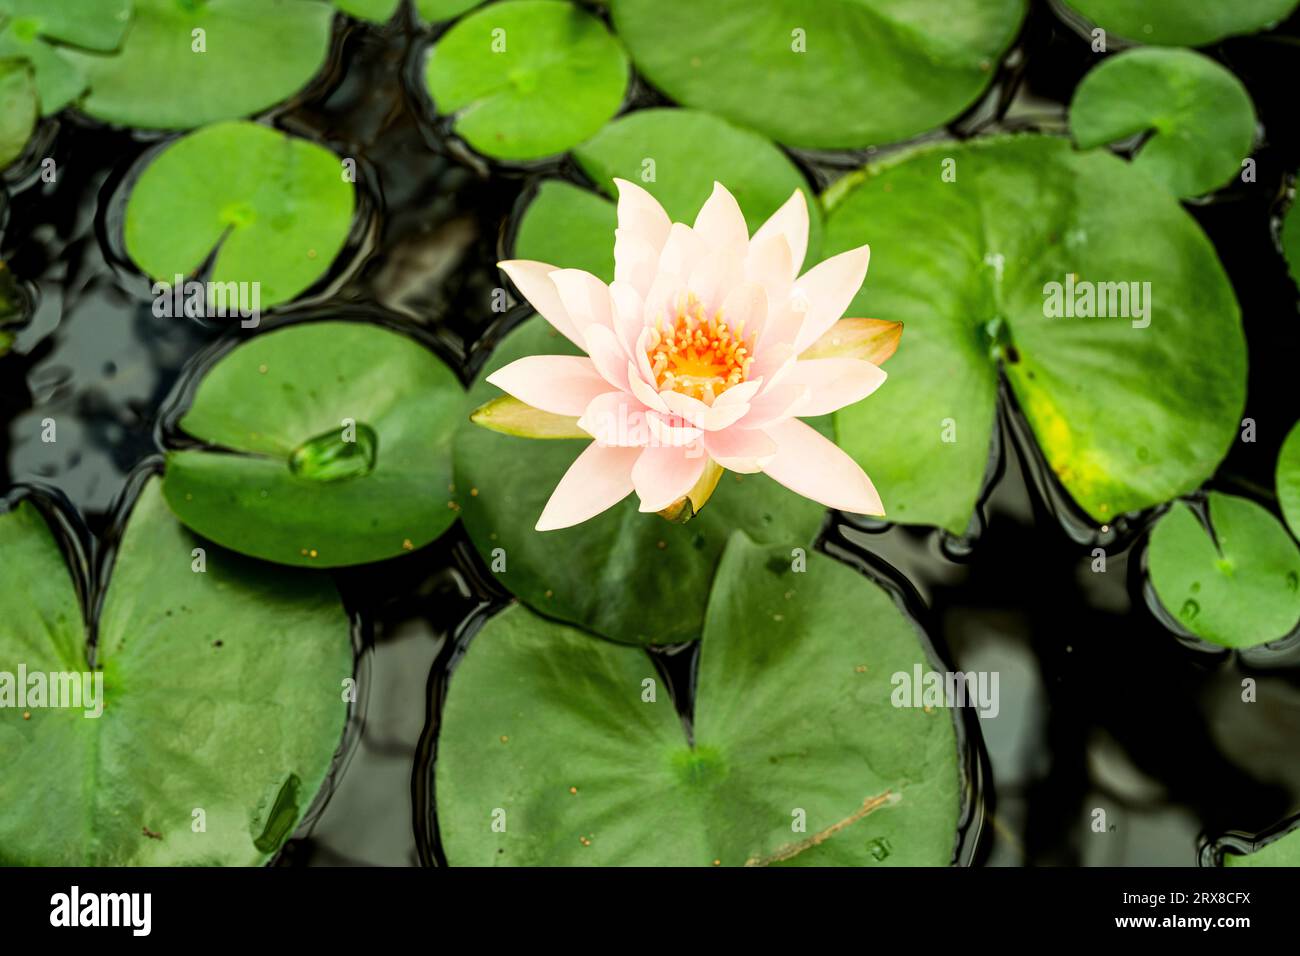 Amazon Water Lily at the Conservatory of Flower San Francisco Stock Photo